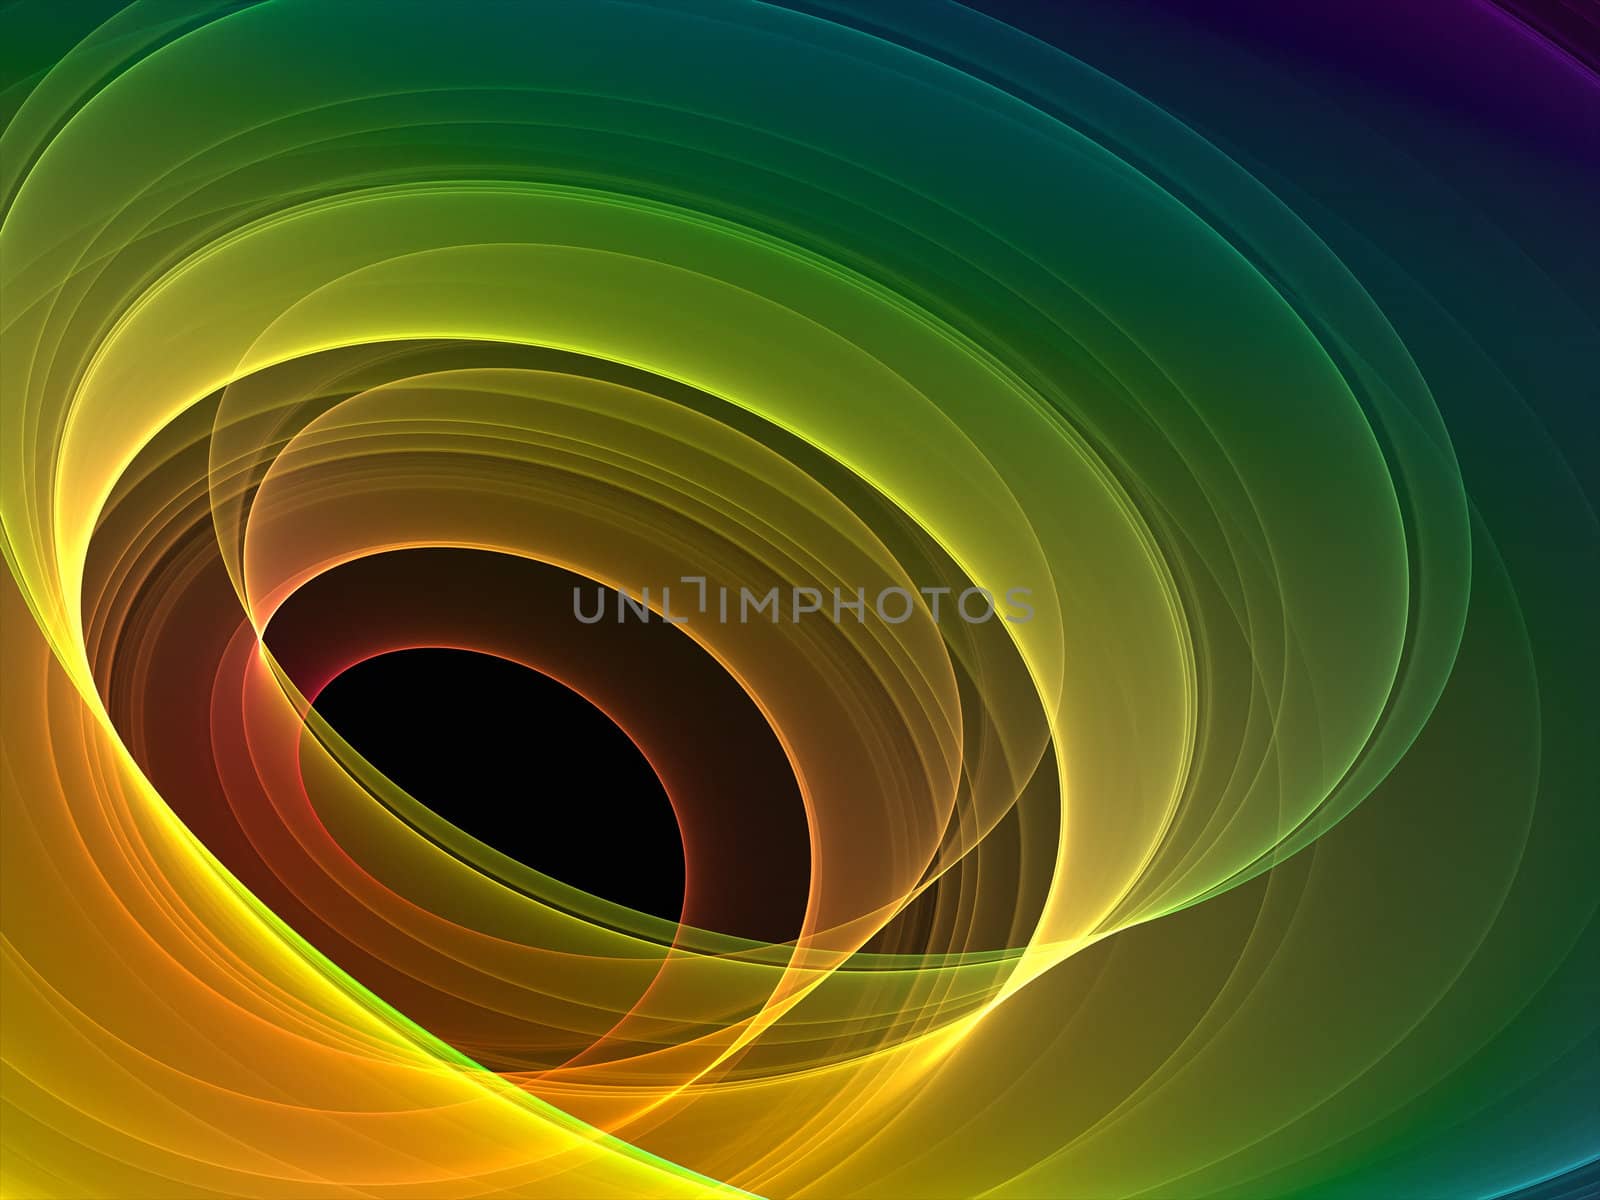 An illustration of a nice abstract rainbow background